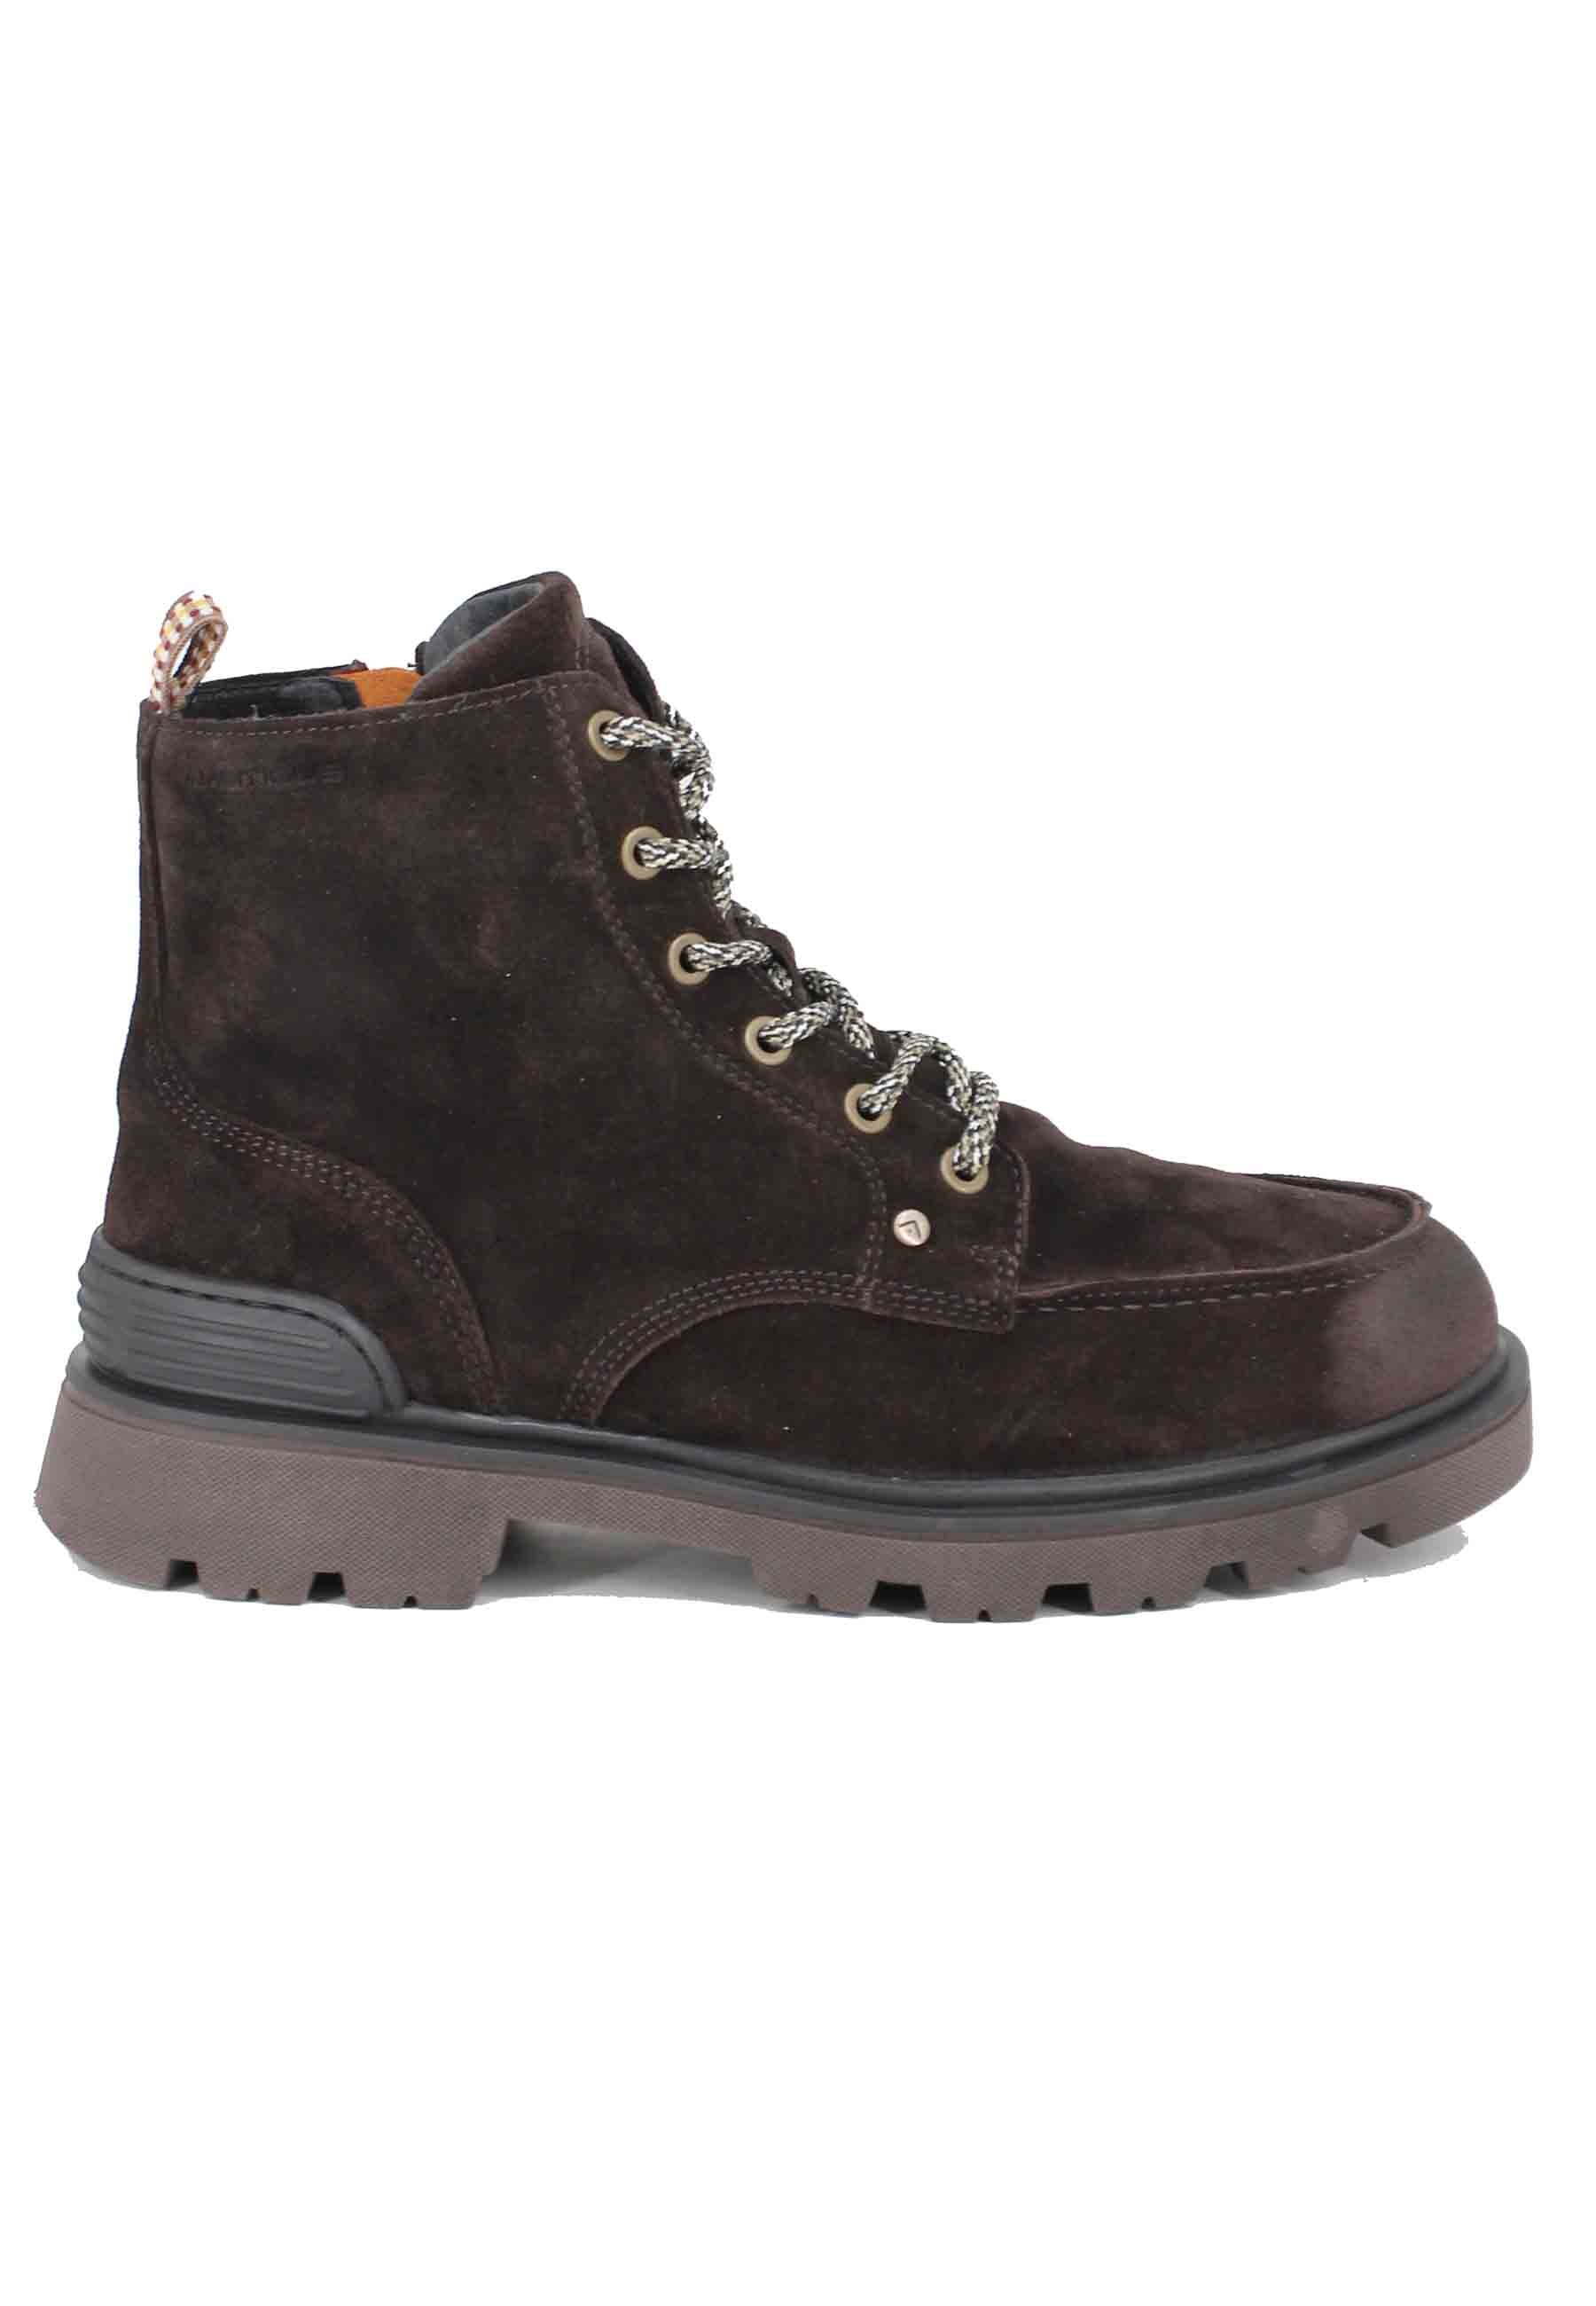 Men's lace-up ankle boots in greased brown suede